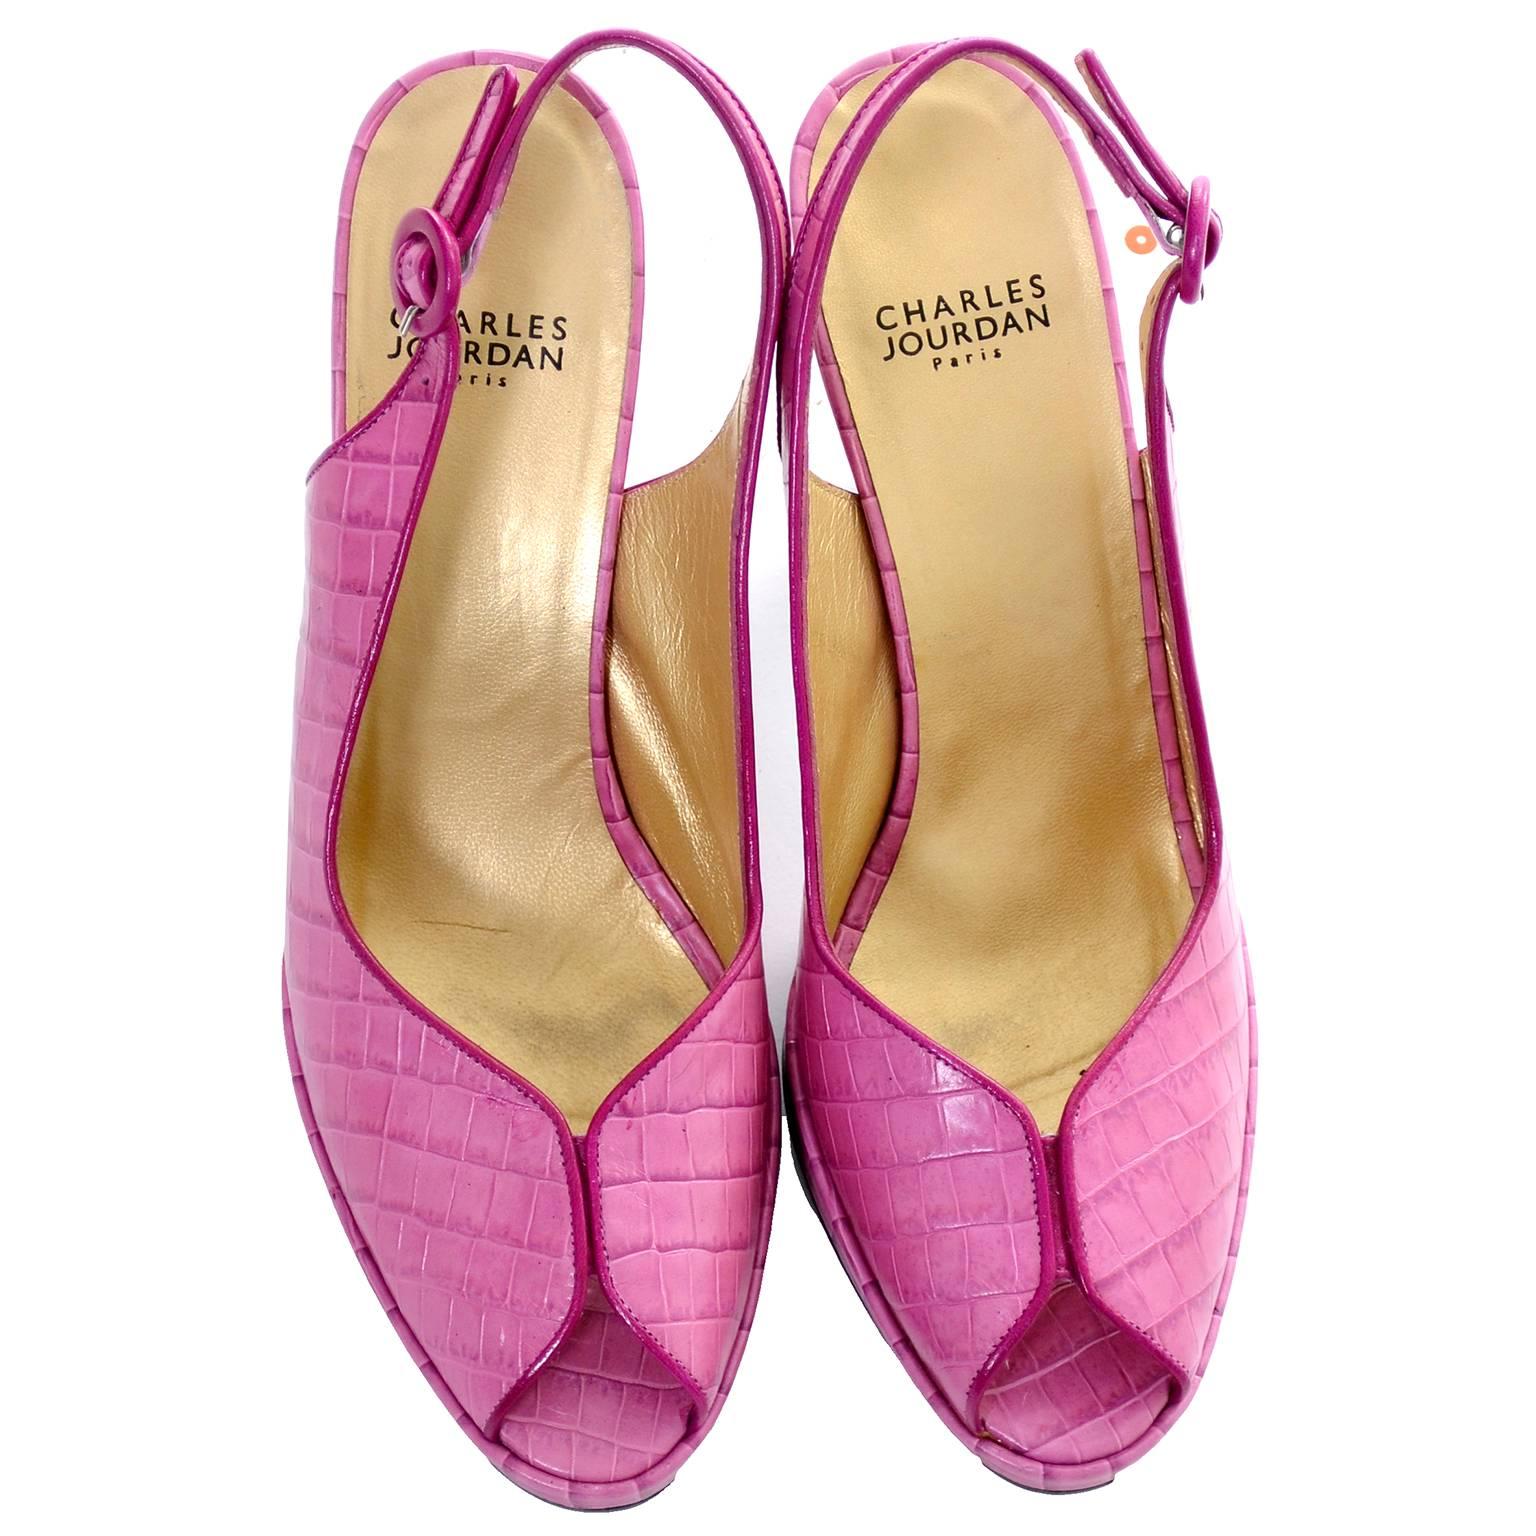 These Charles Jourdan peep toe shoes are in almost new condition and are labeled a size 9.  They are made of a a purplish pink alligator embossed leather and have 4 inch heels.  The shoes are 3 inches wide at the widest part of the outside of the